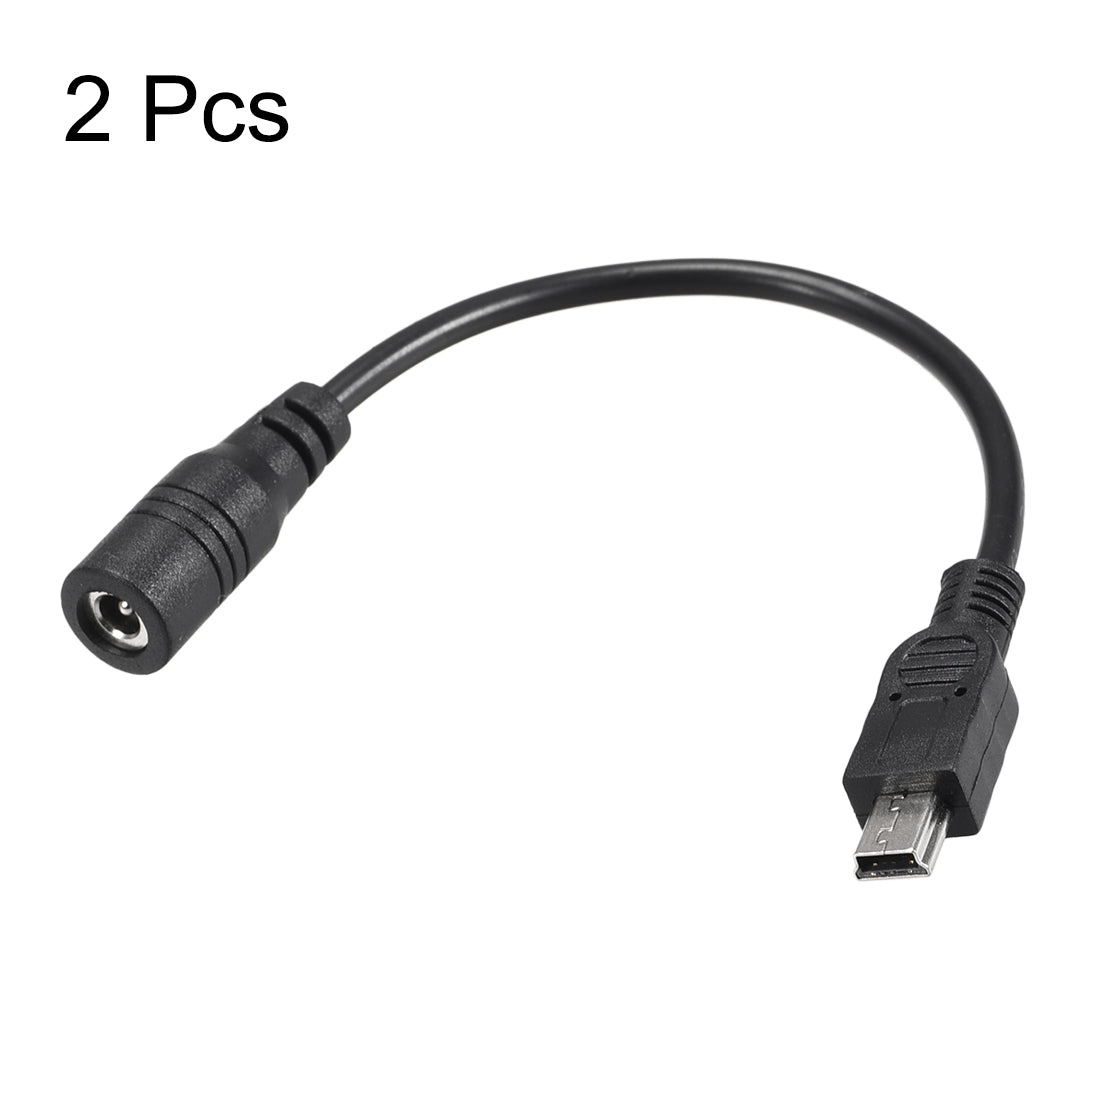 uxcell Uxcell 2pcs 11cm DC Female Power Supply,4.0x1.7mm Adapter to Mini USB Plug Male Cable